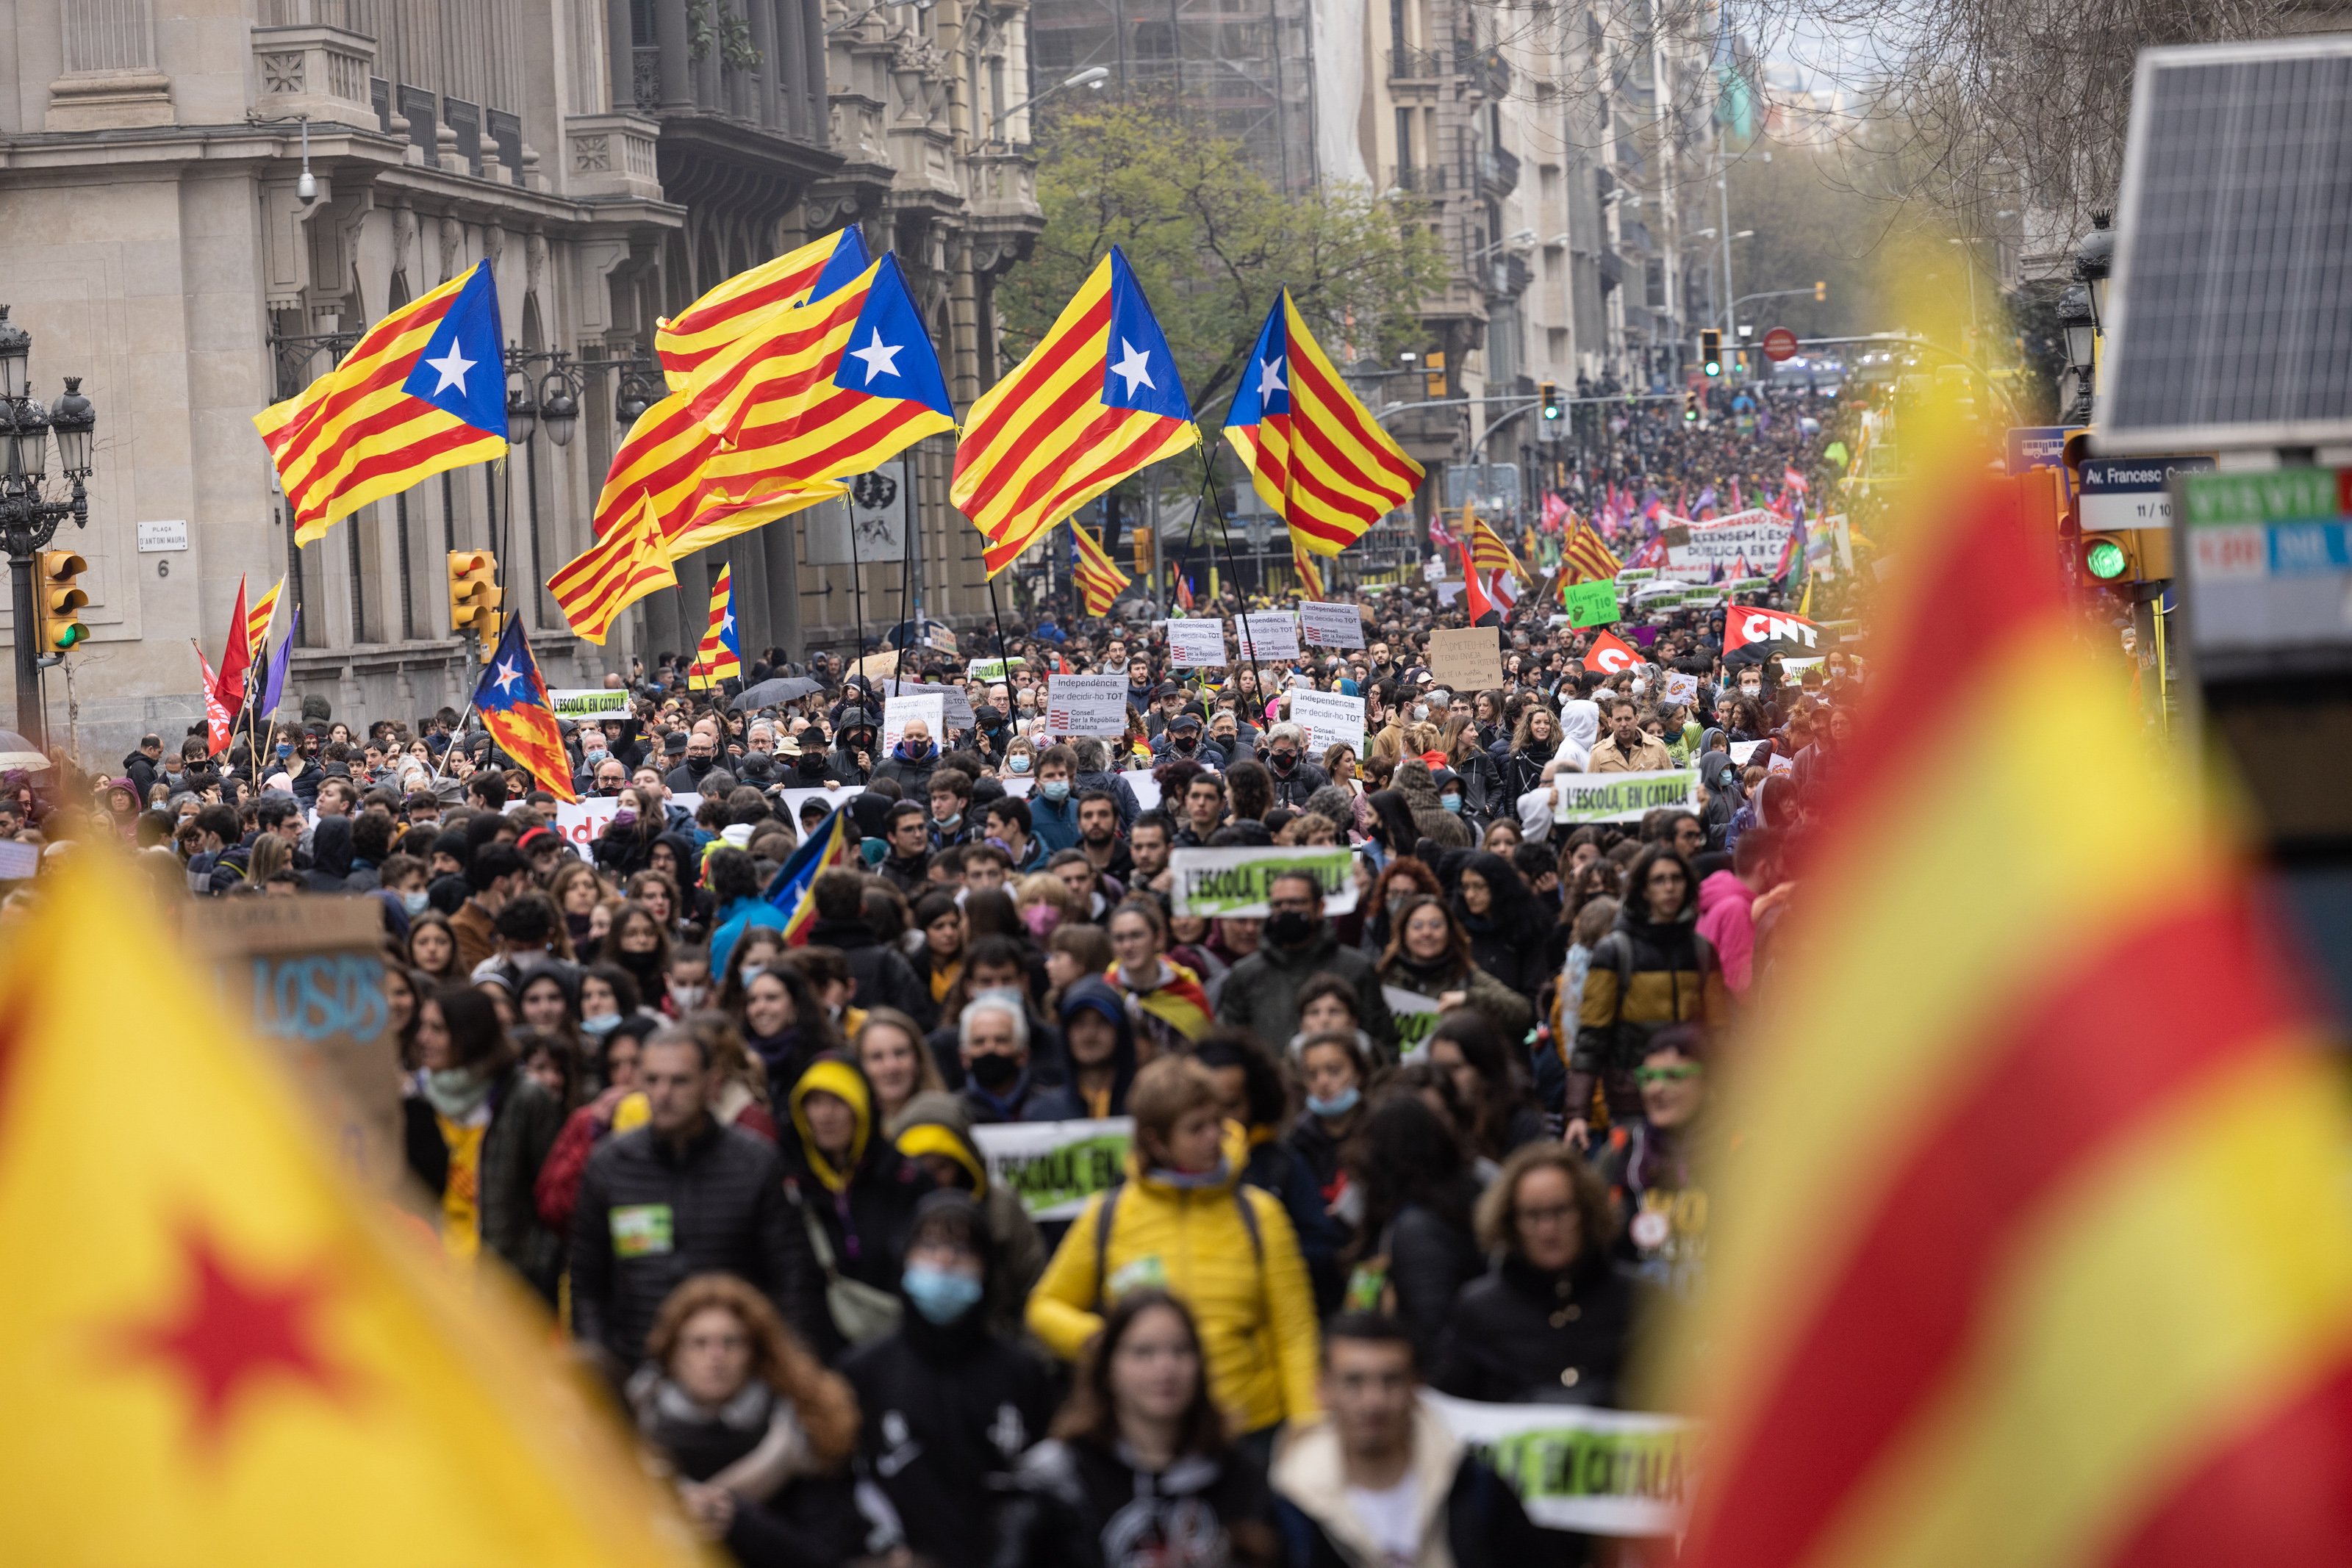 Thousands march in Barcelona against court imposition of 25% Spanish in schools